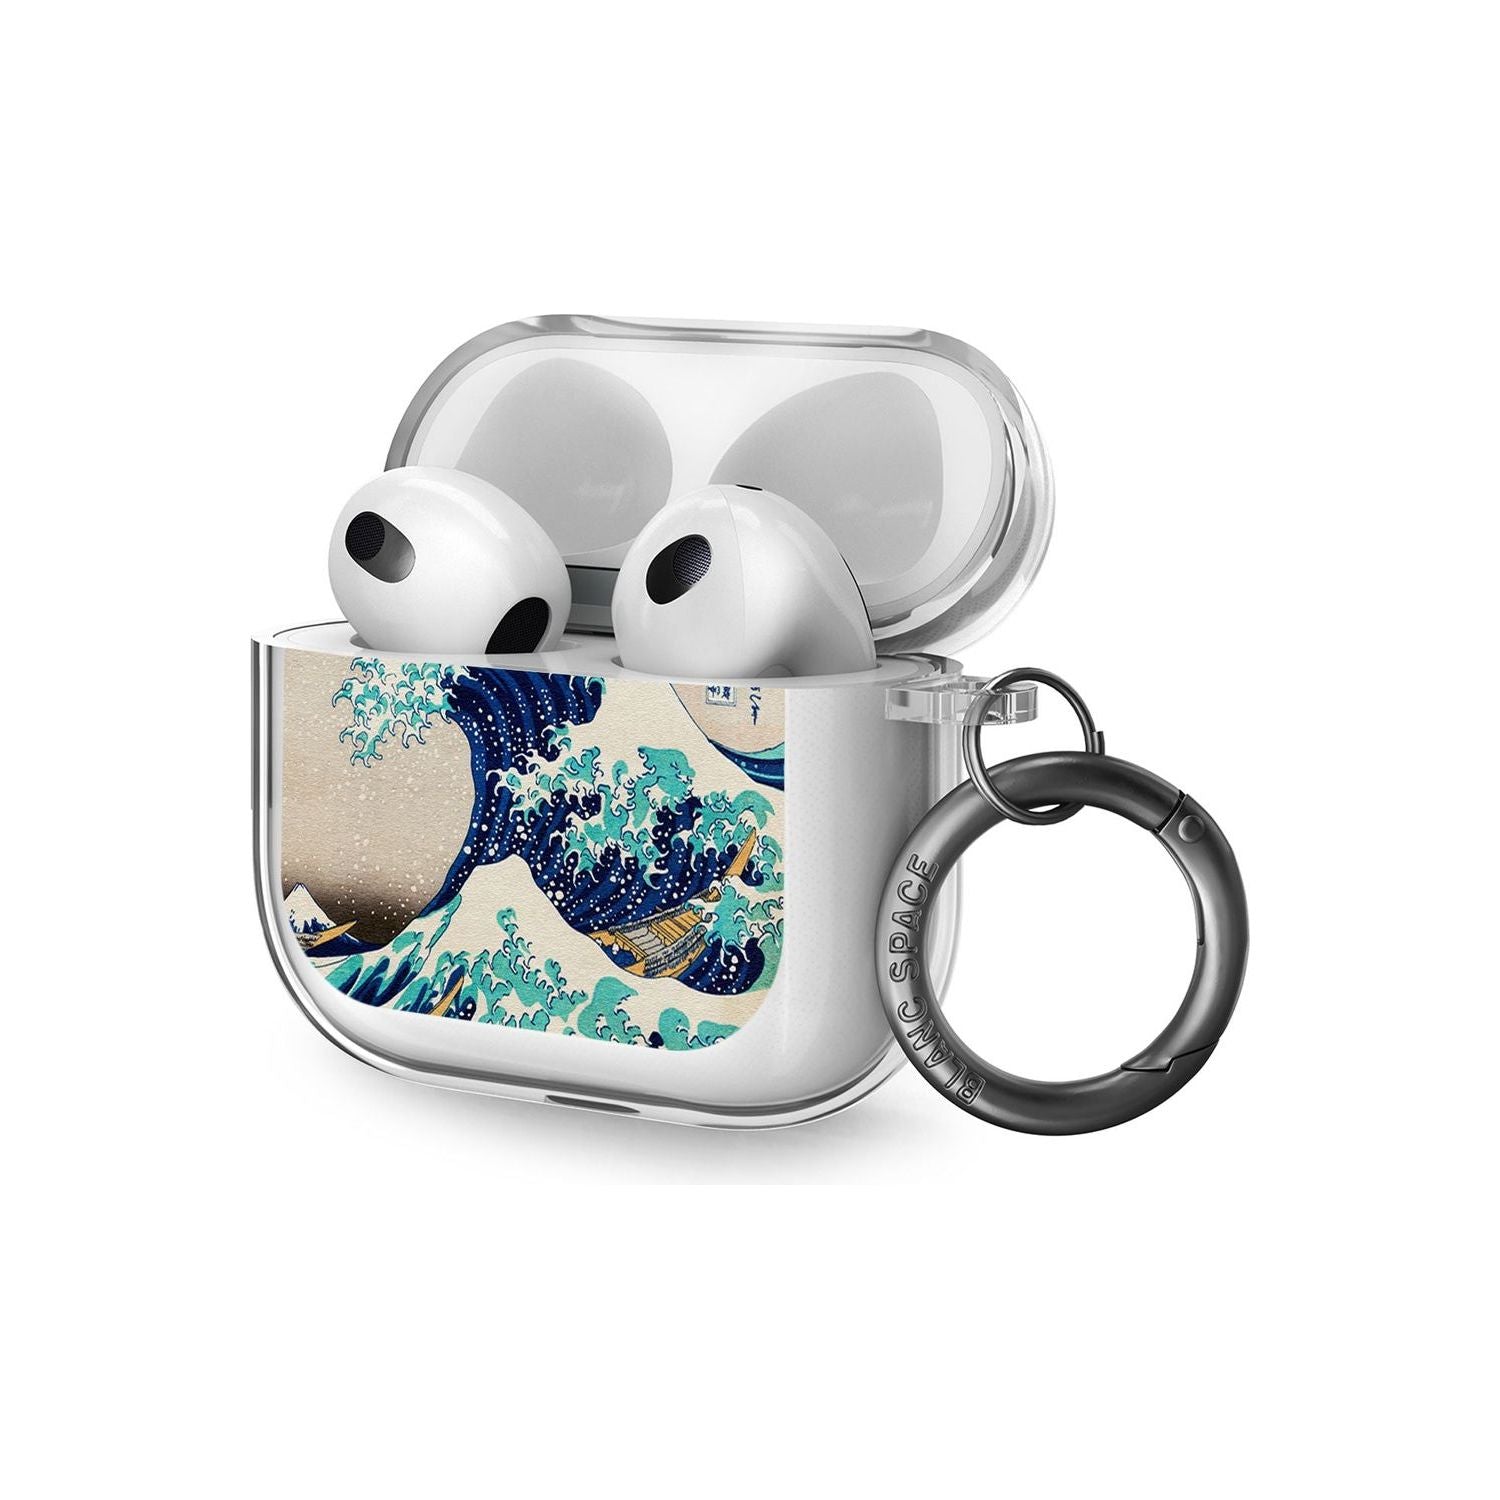  Airpod Case (3rd Generation)